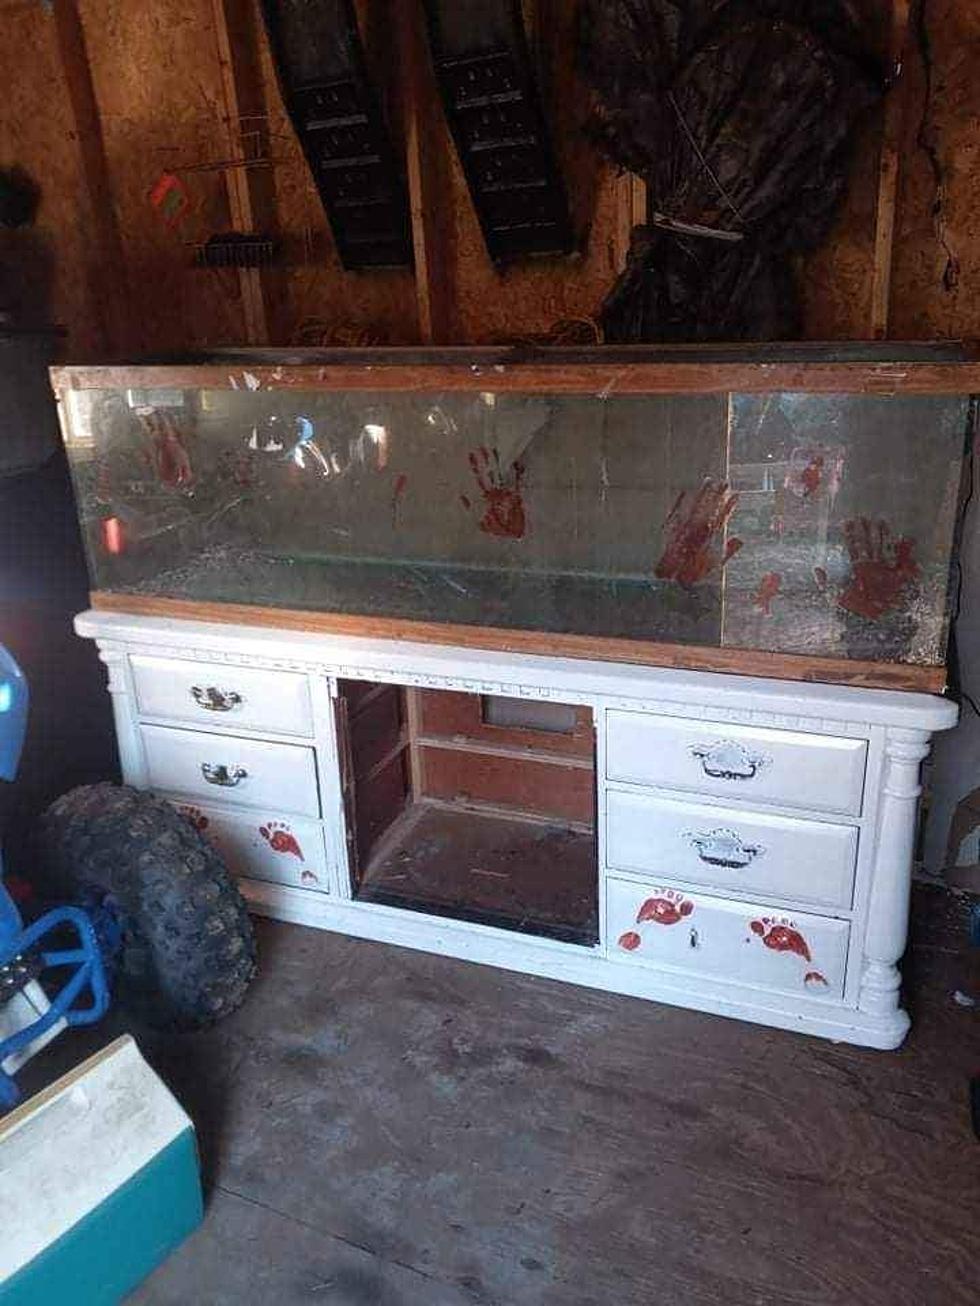 Horrifying Bloody Fish Tank For Sale in Fulton